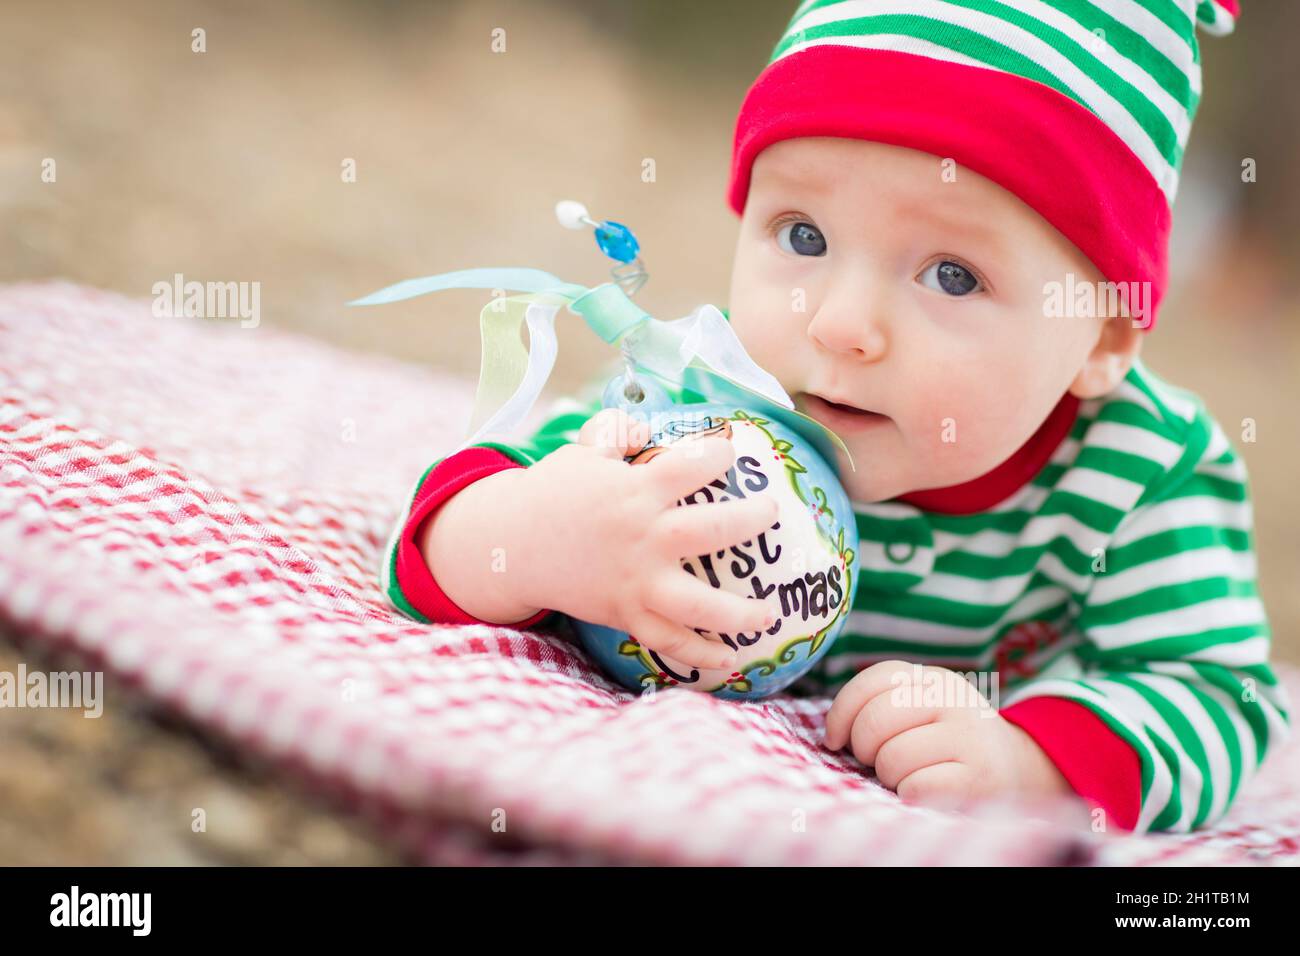 Beautiful Infant Baby On Blanket With Babys First Christmas Ornament. Stock Photo